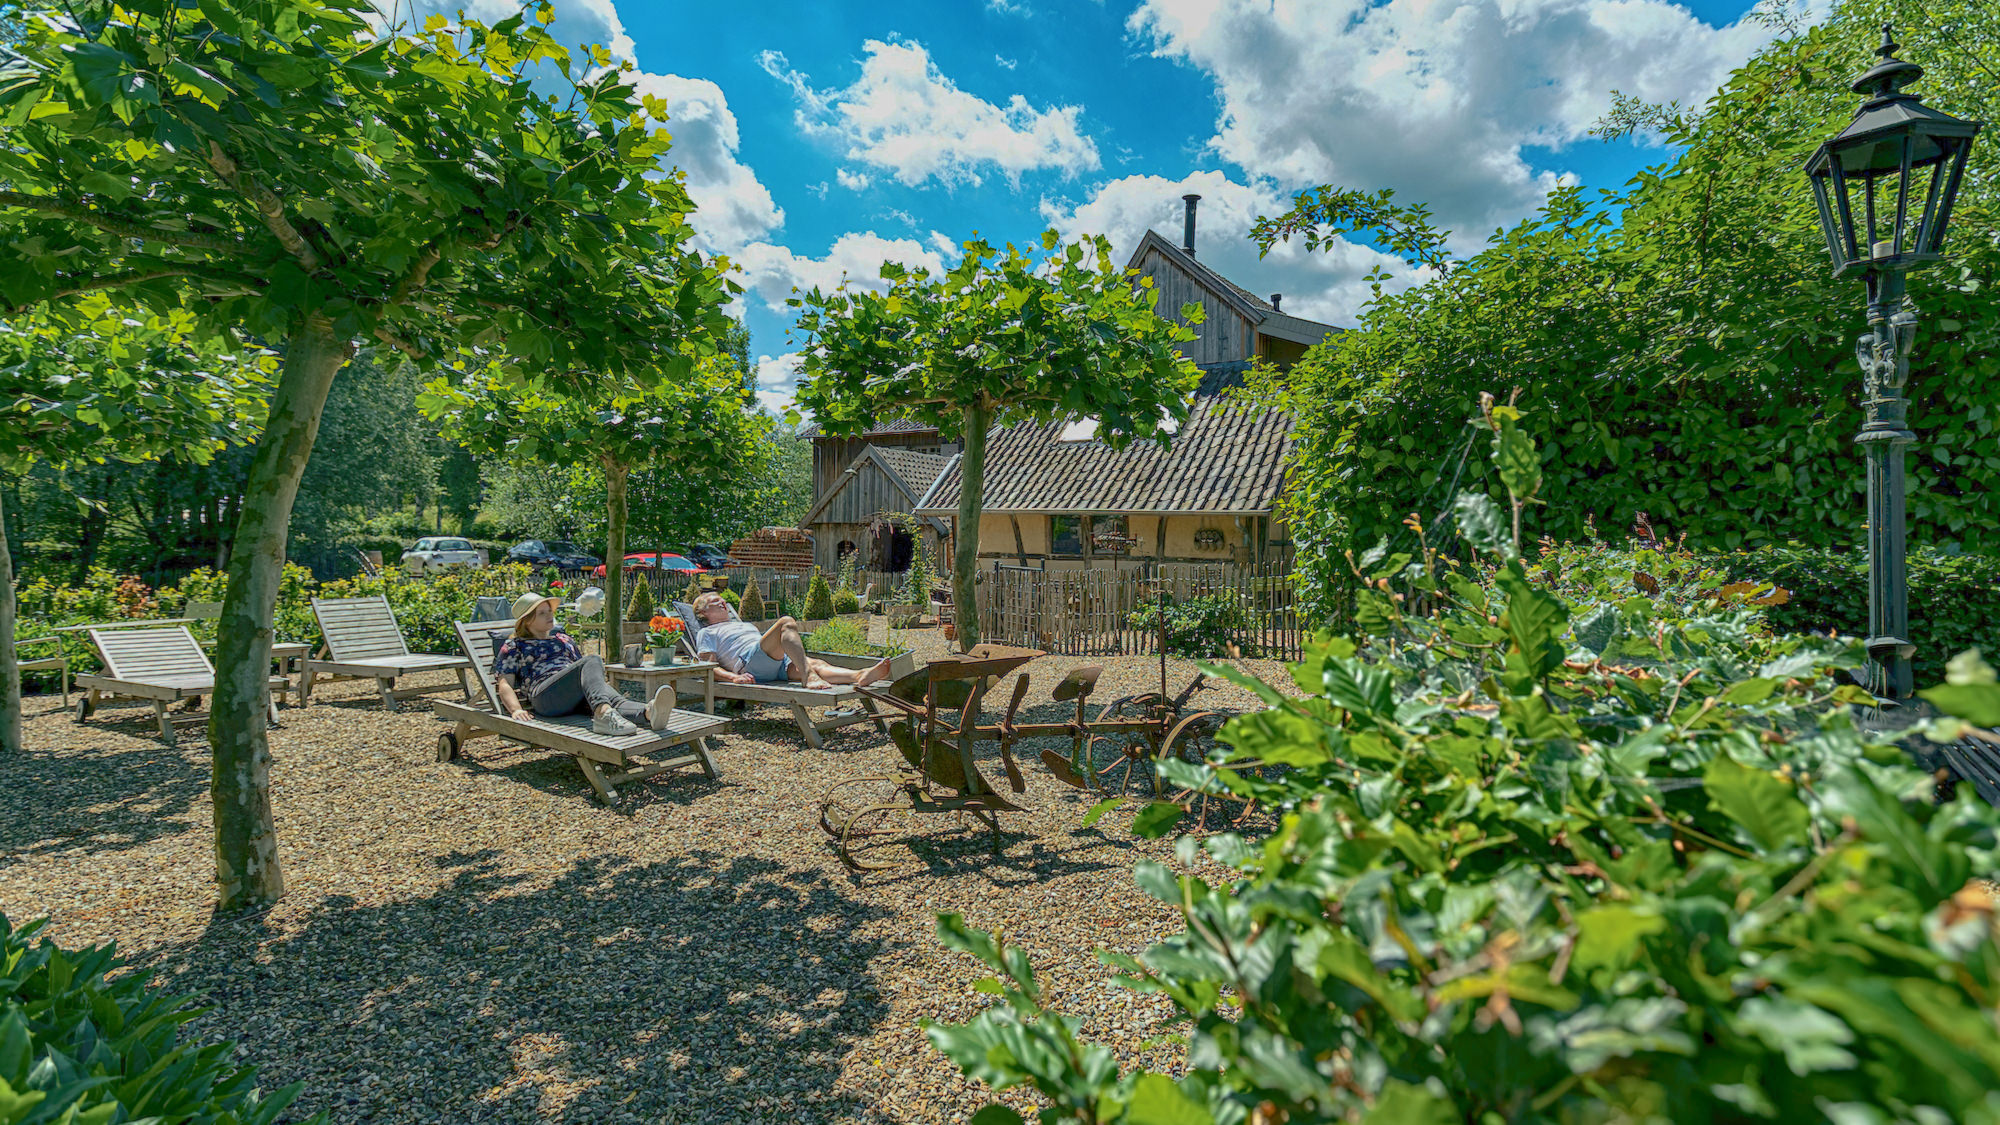 Guests can enjoy the white Gans, which is visible at the end, on a lounger in the garden of Hoeve.